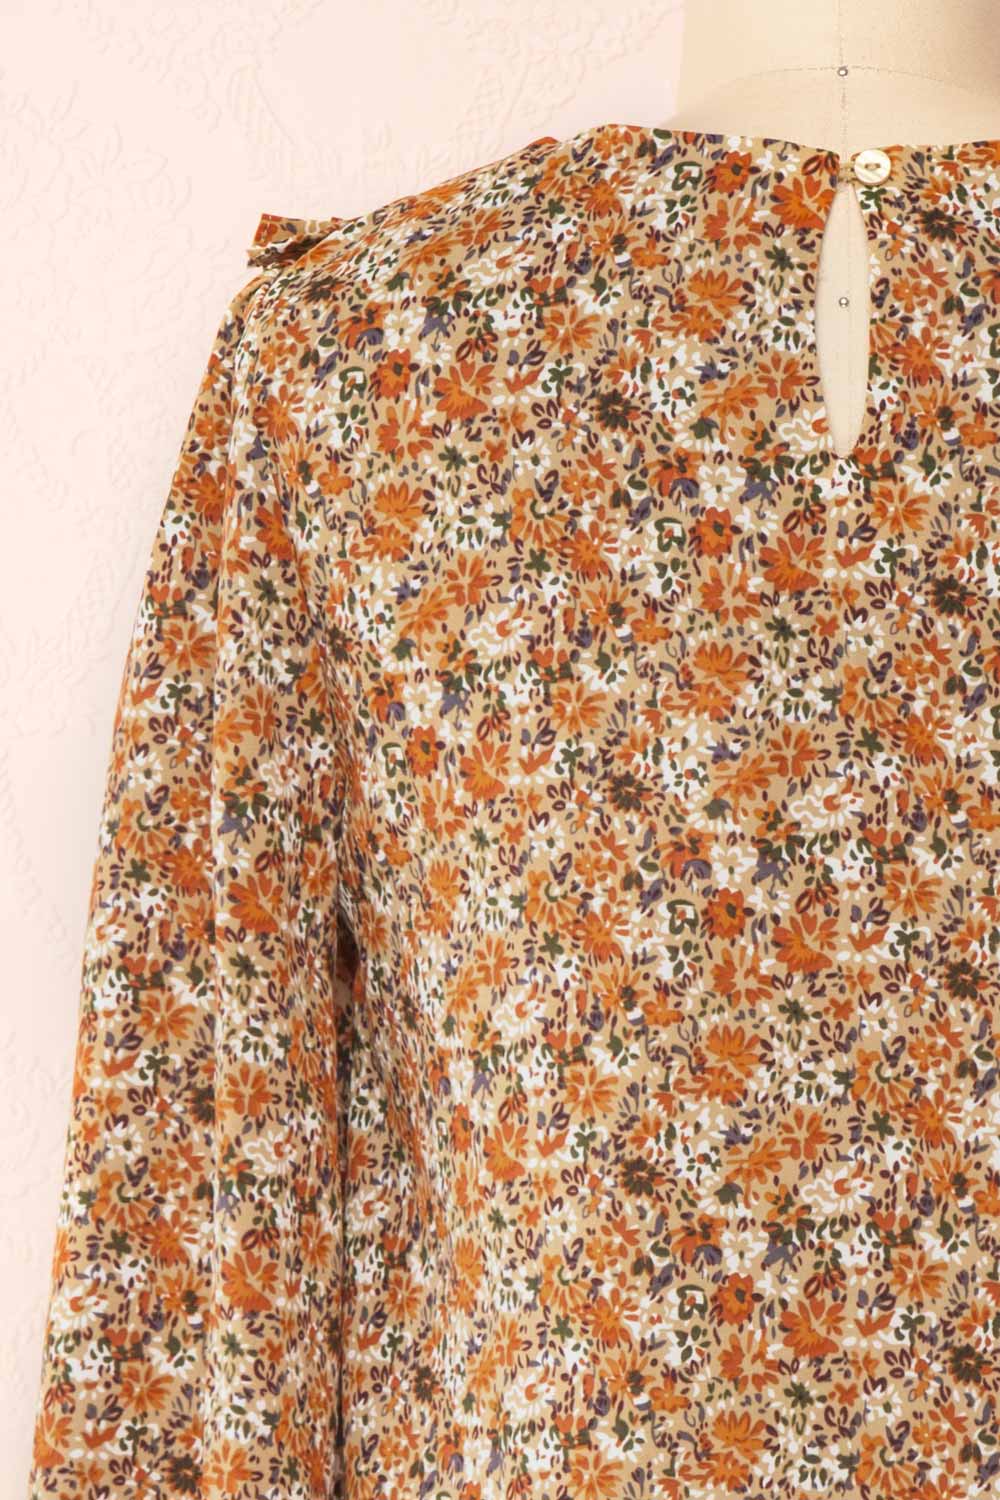 Pearlie Floral Blouse w/ Ruffles & Puff Sleeves | Boutique 1861 back close-up